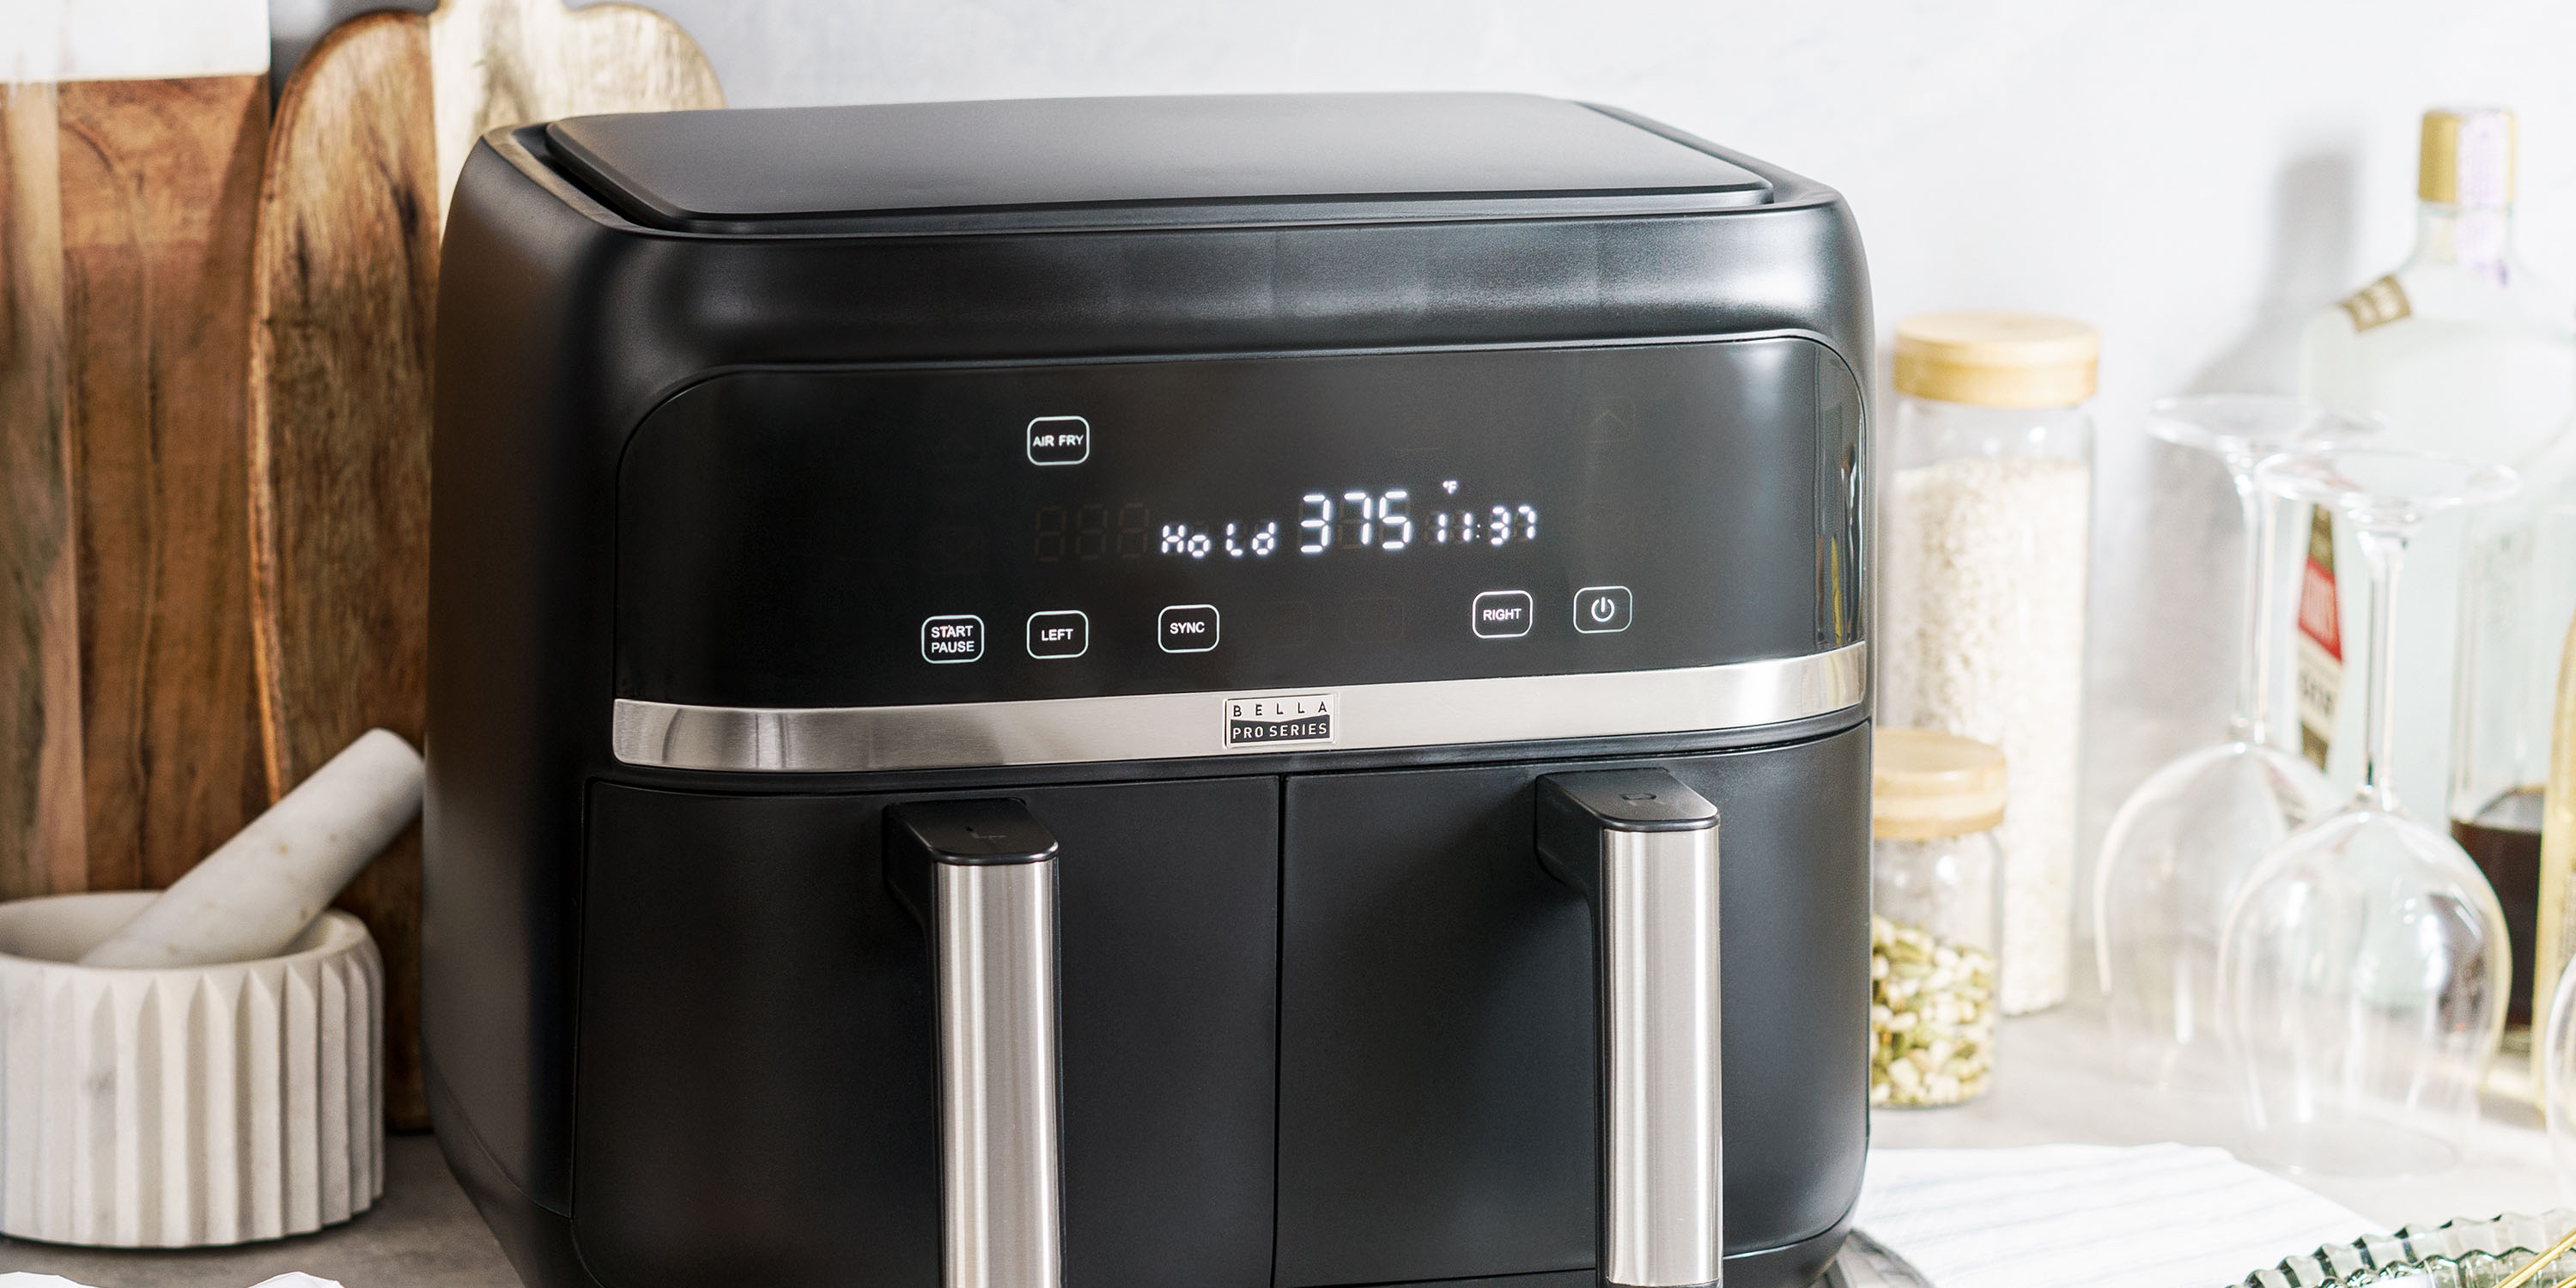 Cook two things at once with the 8-qt. Bella dual basket air fryer